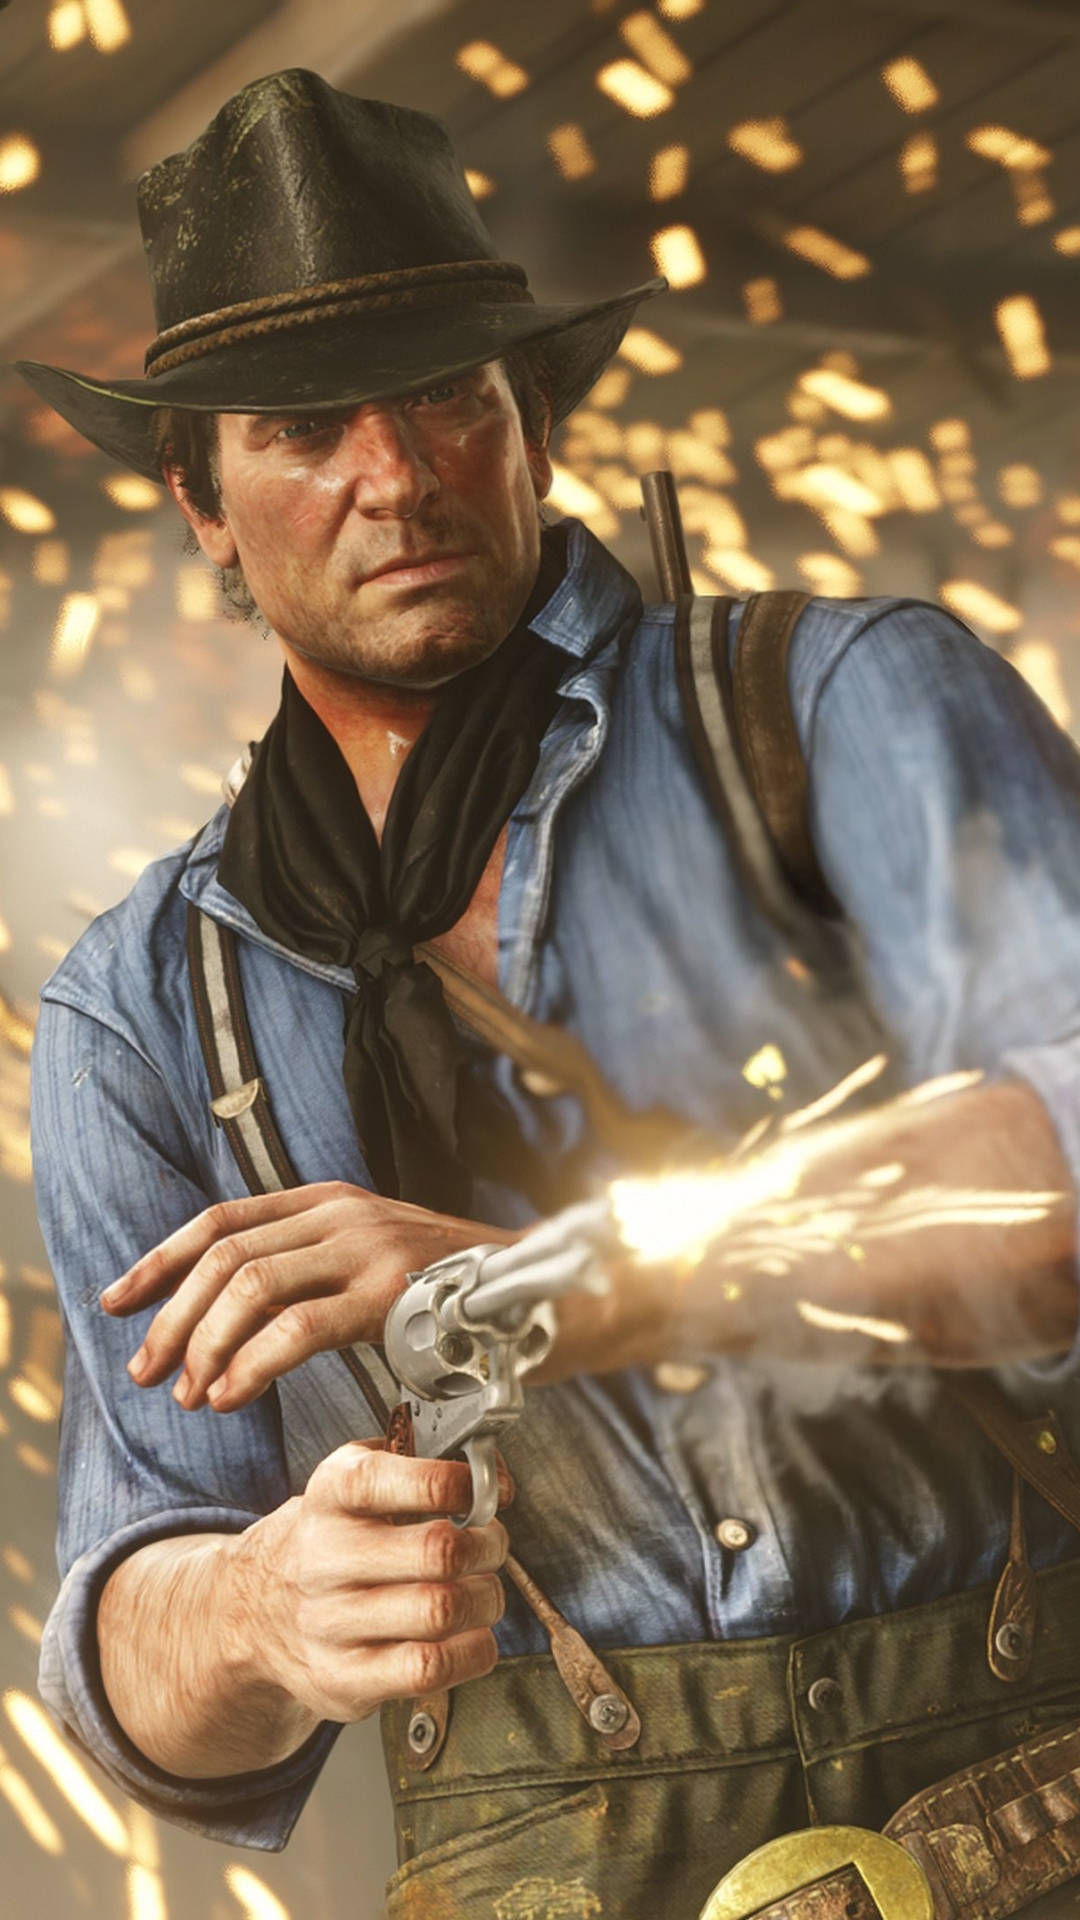 Caption: Riveting Red Dead Action on iPhone Wallpaper